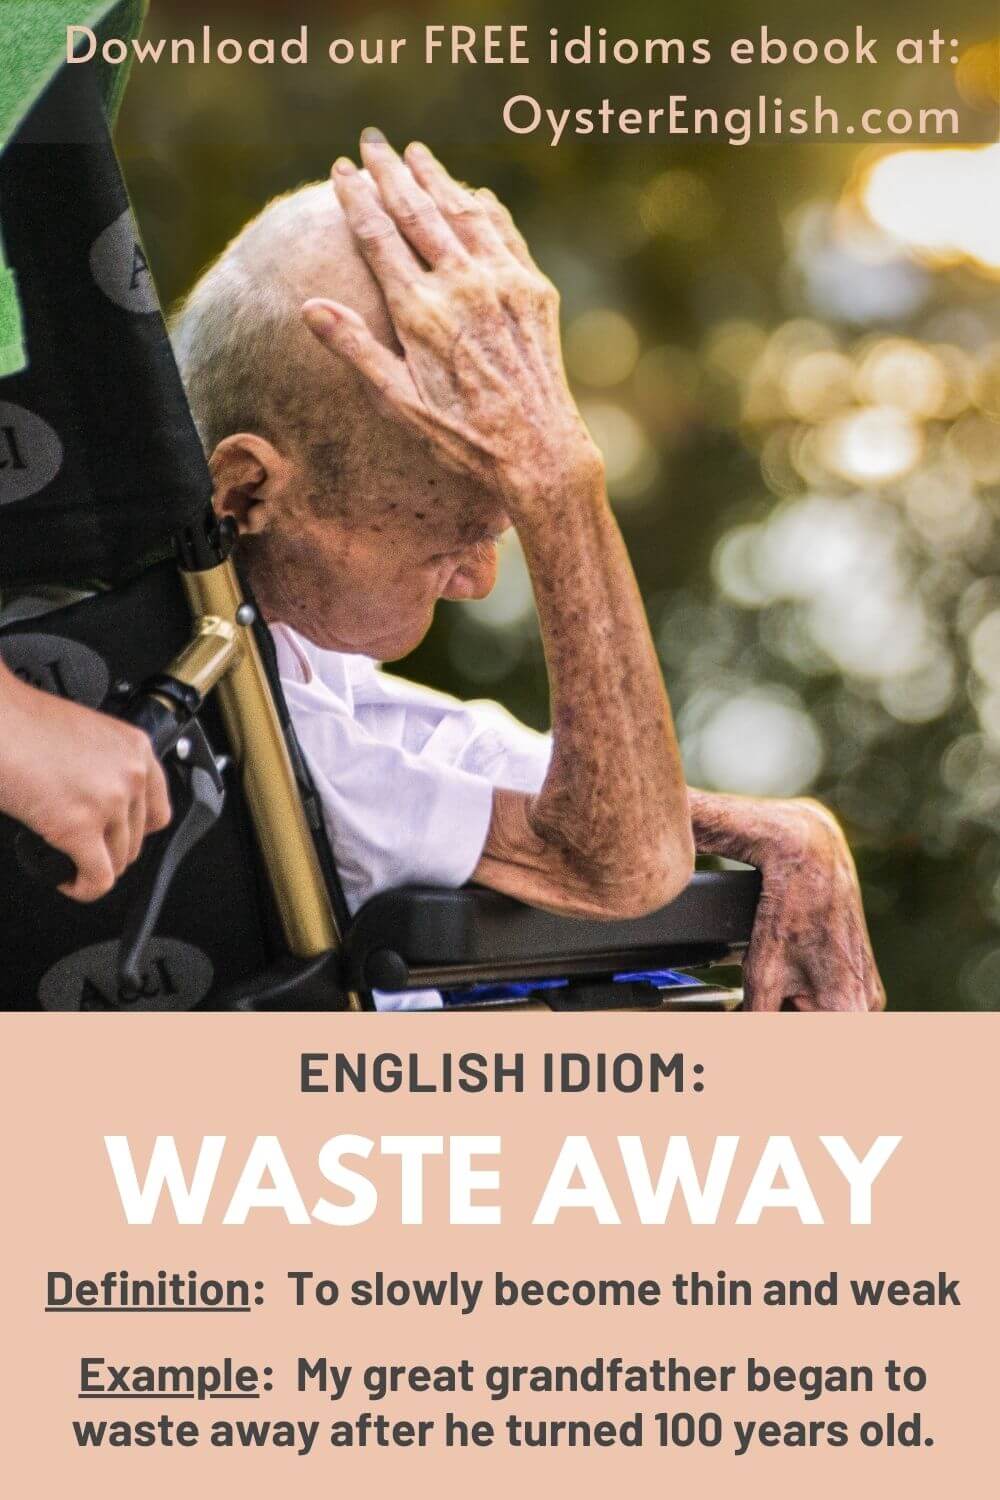 A very thin elderly man in a wheelchair: My great grandfather began to waste away after he turned 100 years old.